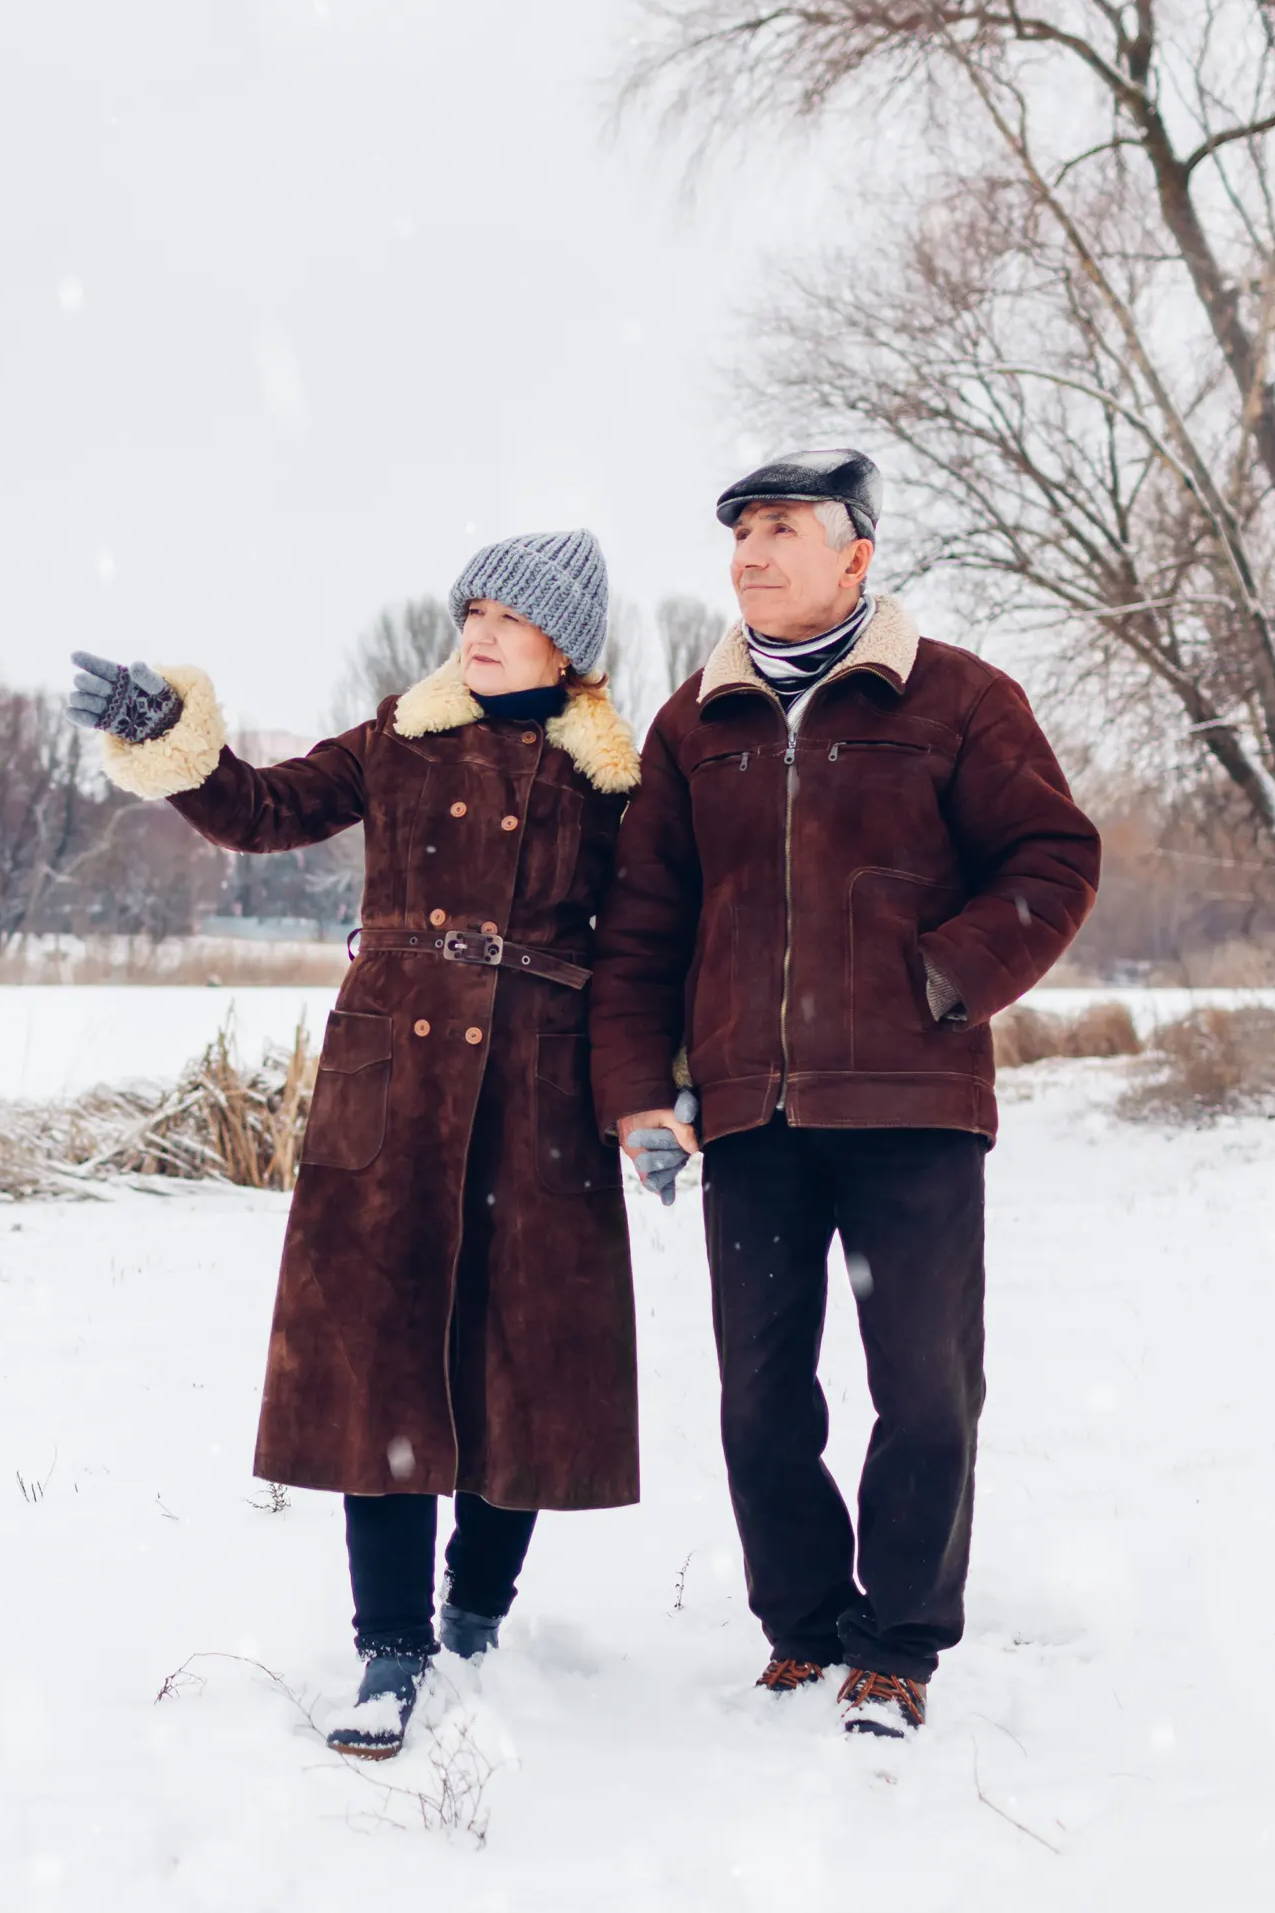 Older couple walking in snow in the winter